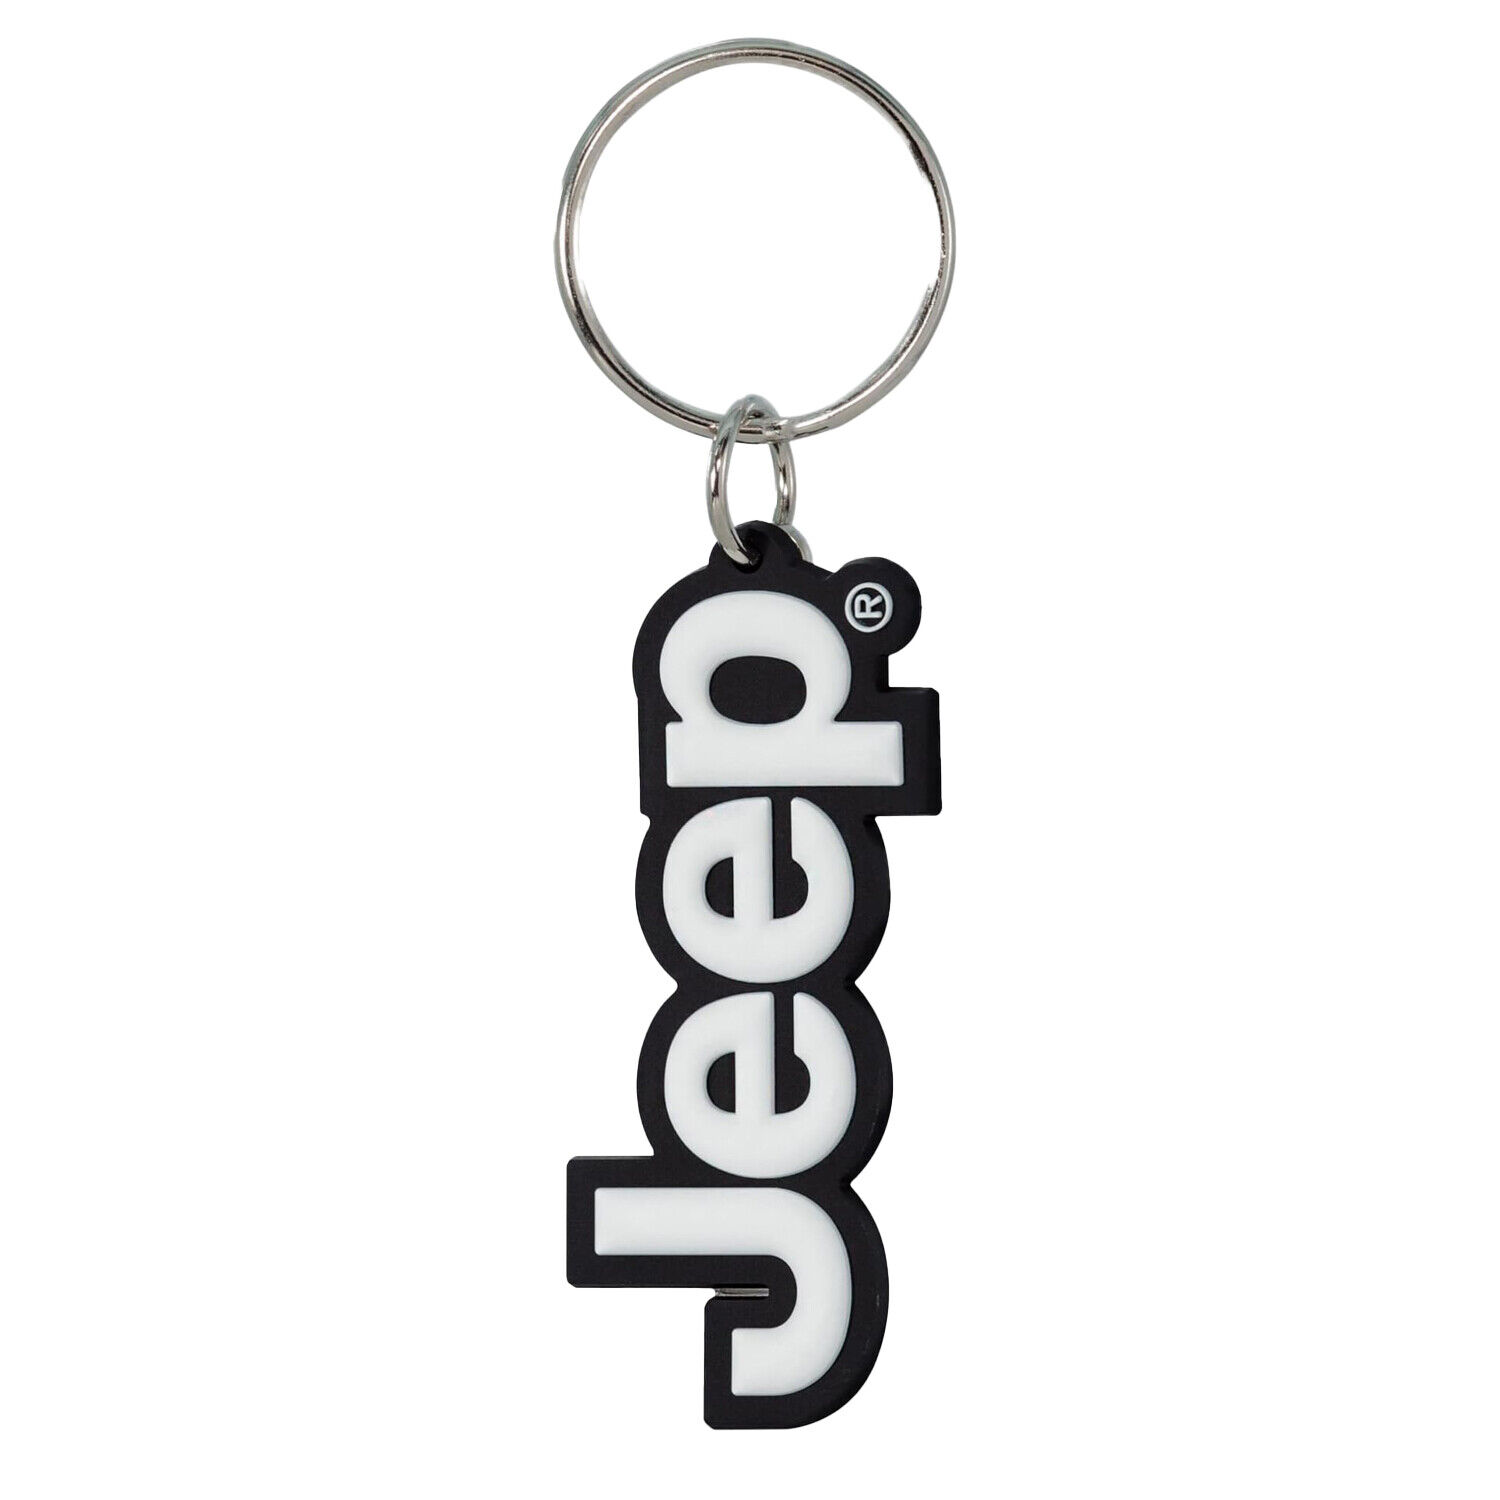 Plasticolor Jeep Keychain - Durable Rubber Key Chain with Iconic Jeep Logo